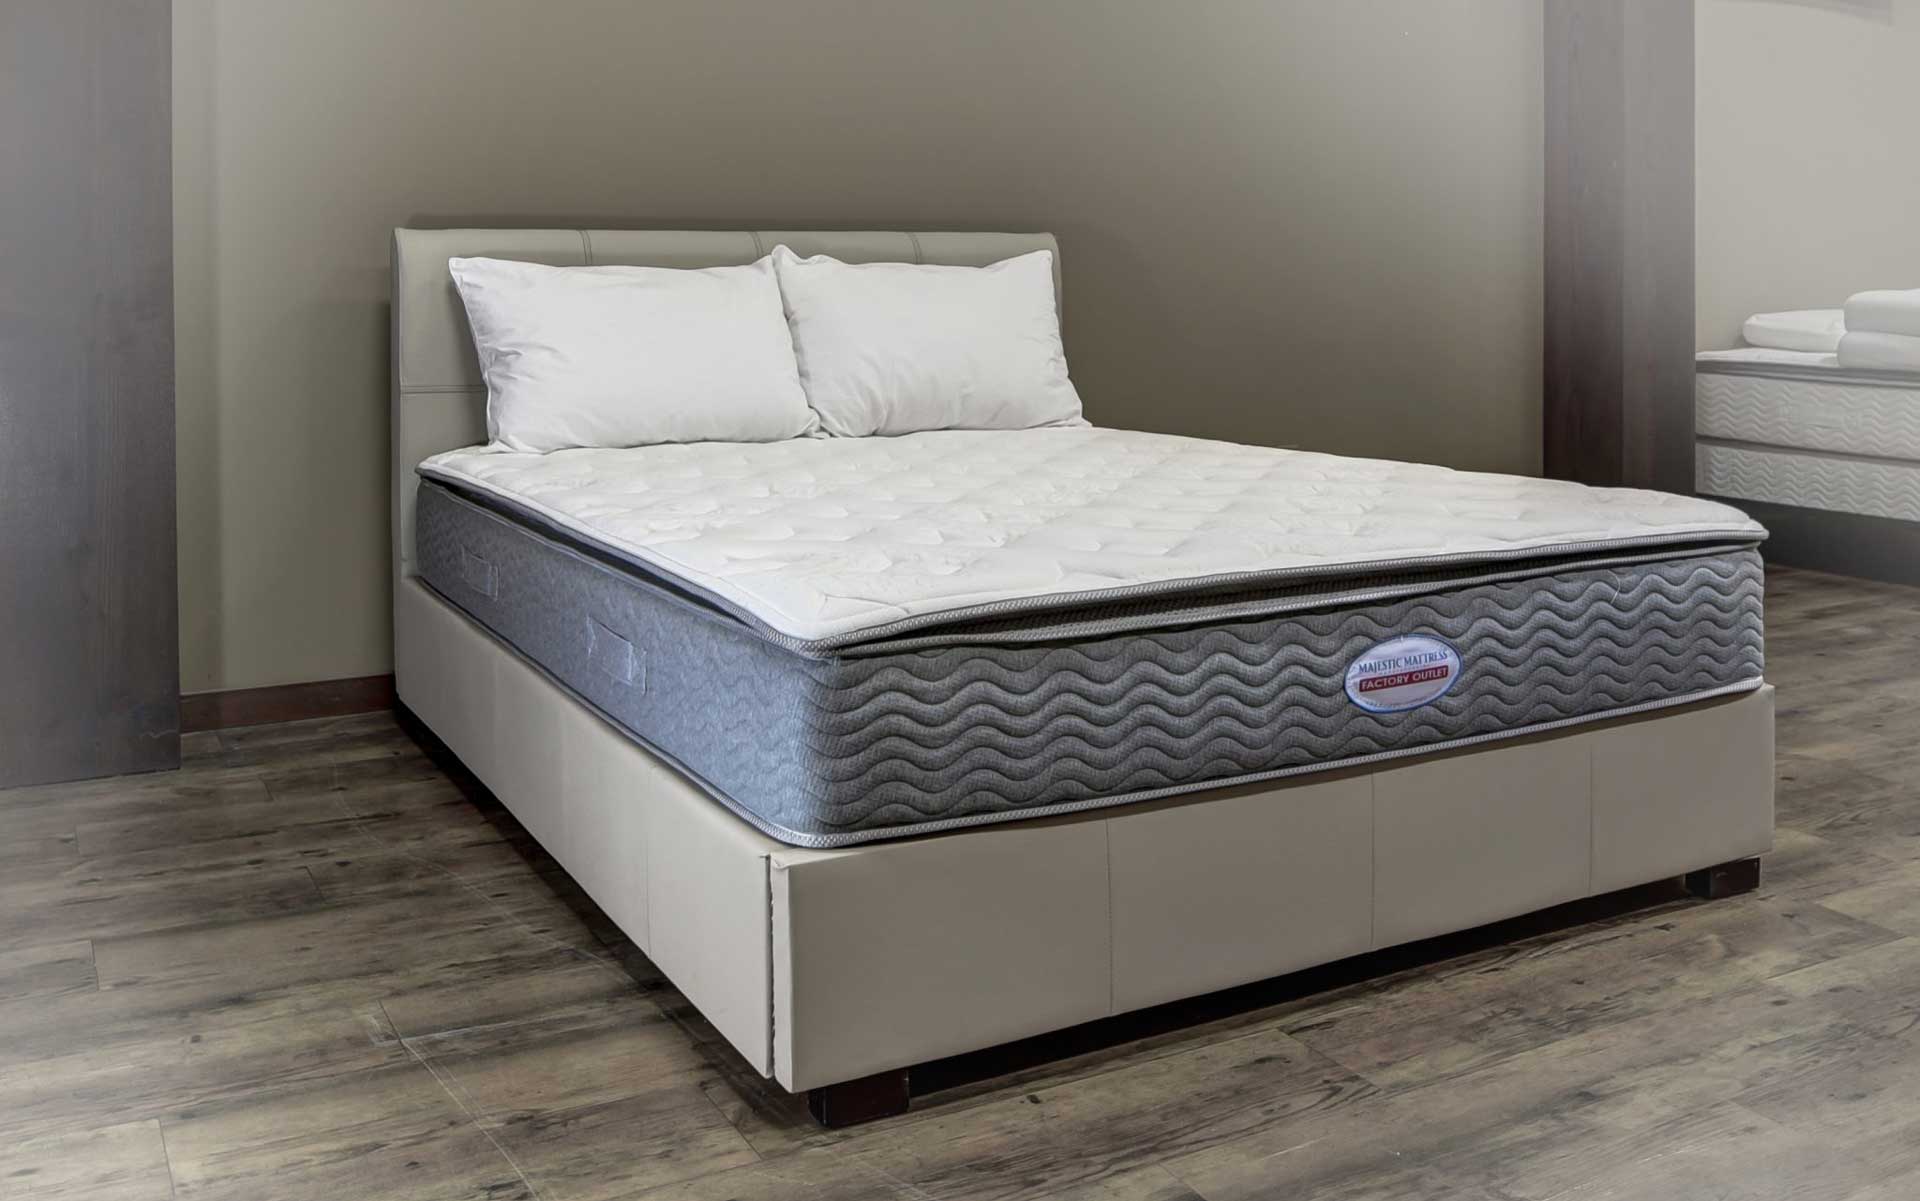 Find Mattresses in Brentwood California